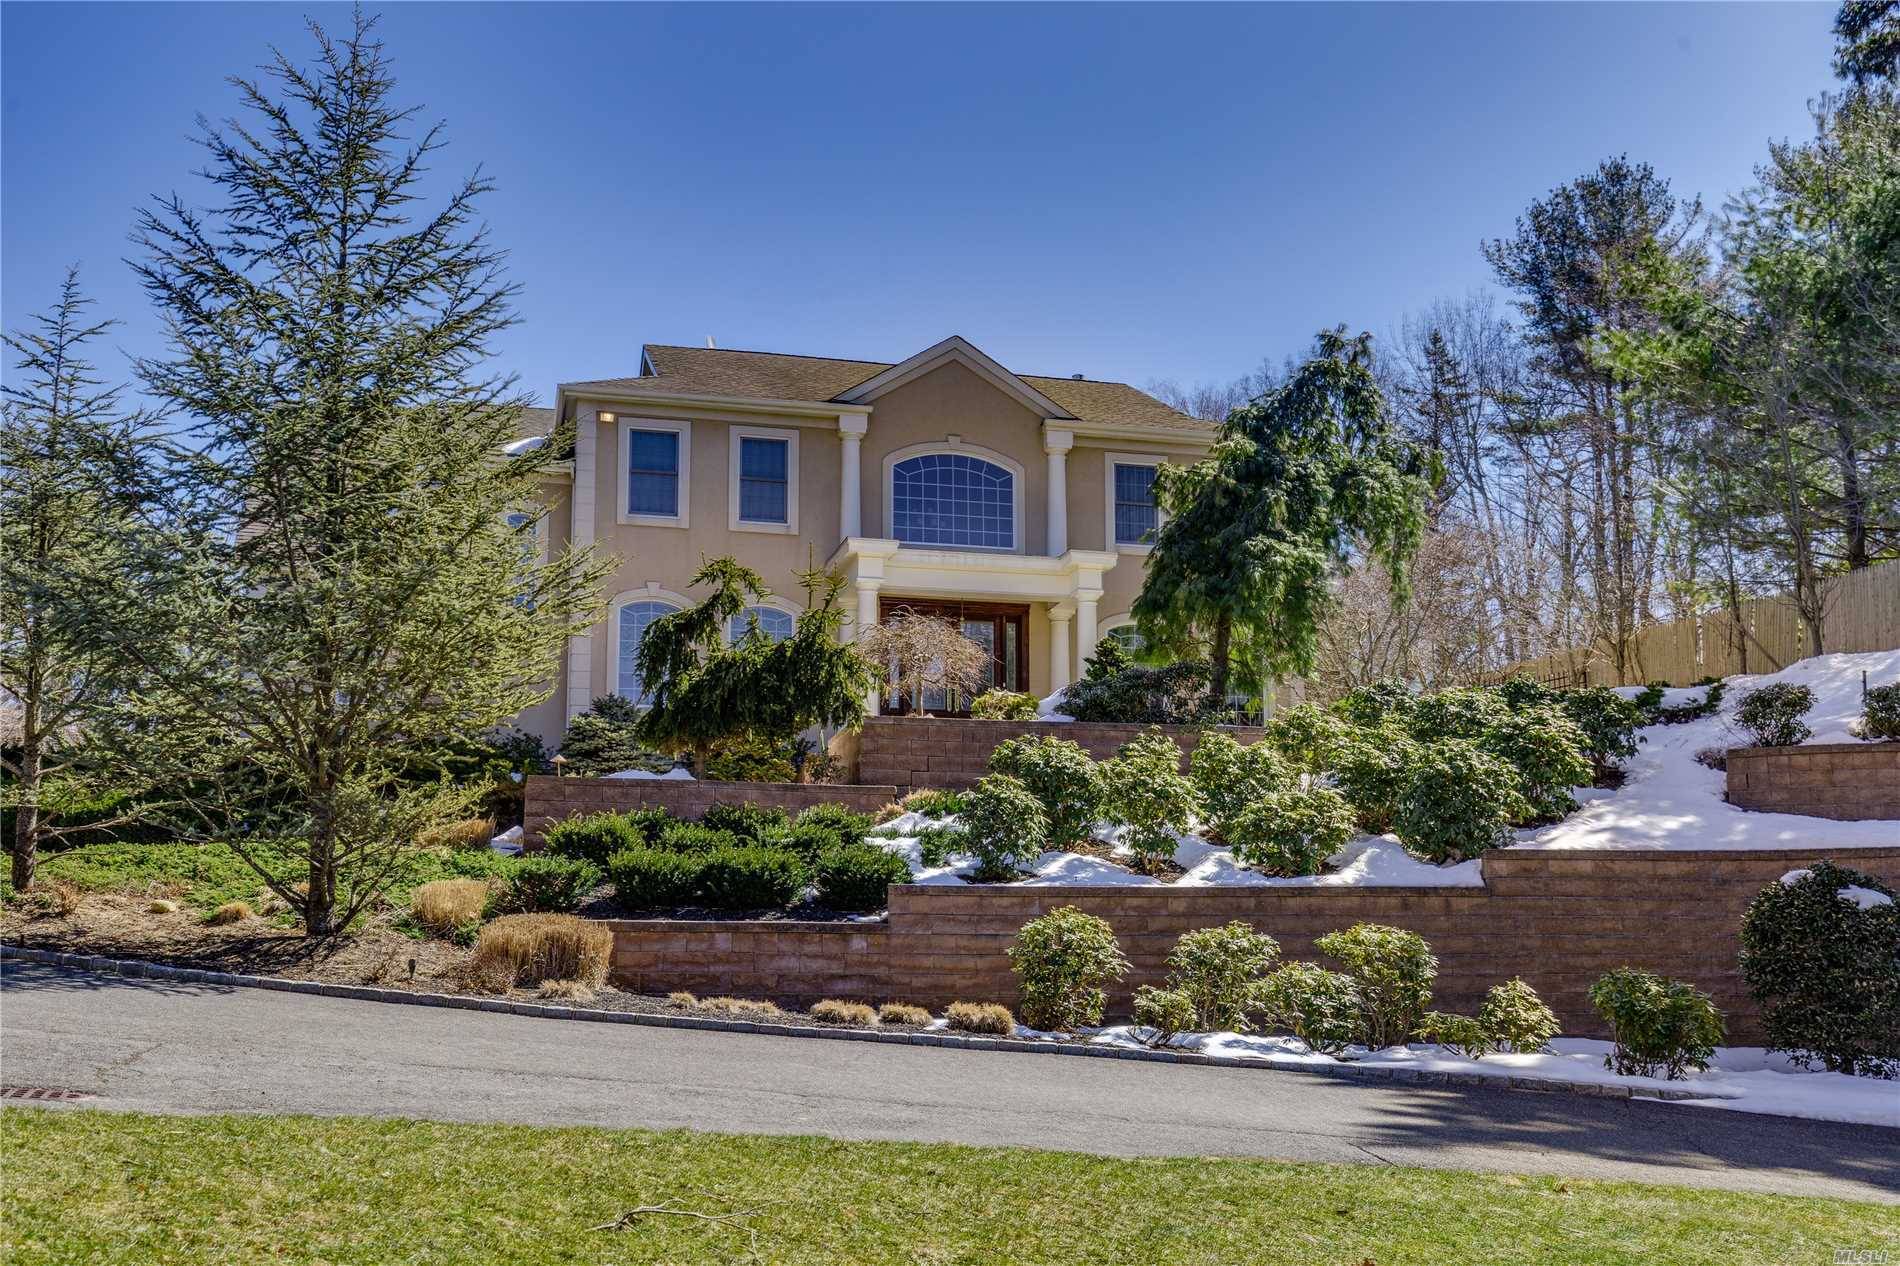 Set Far Back , 500 Feet From The Road, Sits This Magnificent 15 Year Young, 5 Bedroom, 5.